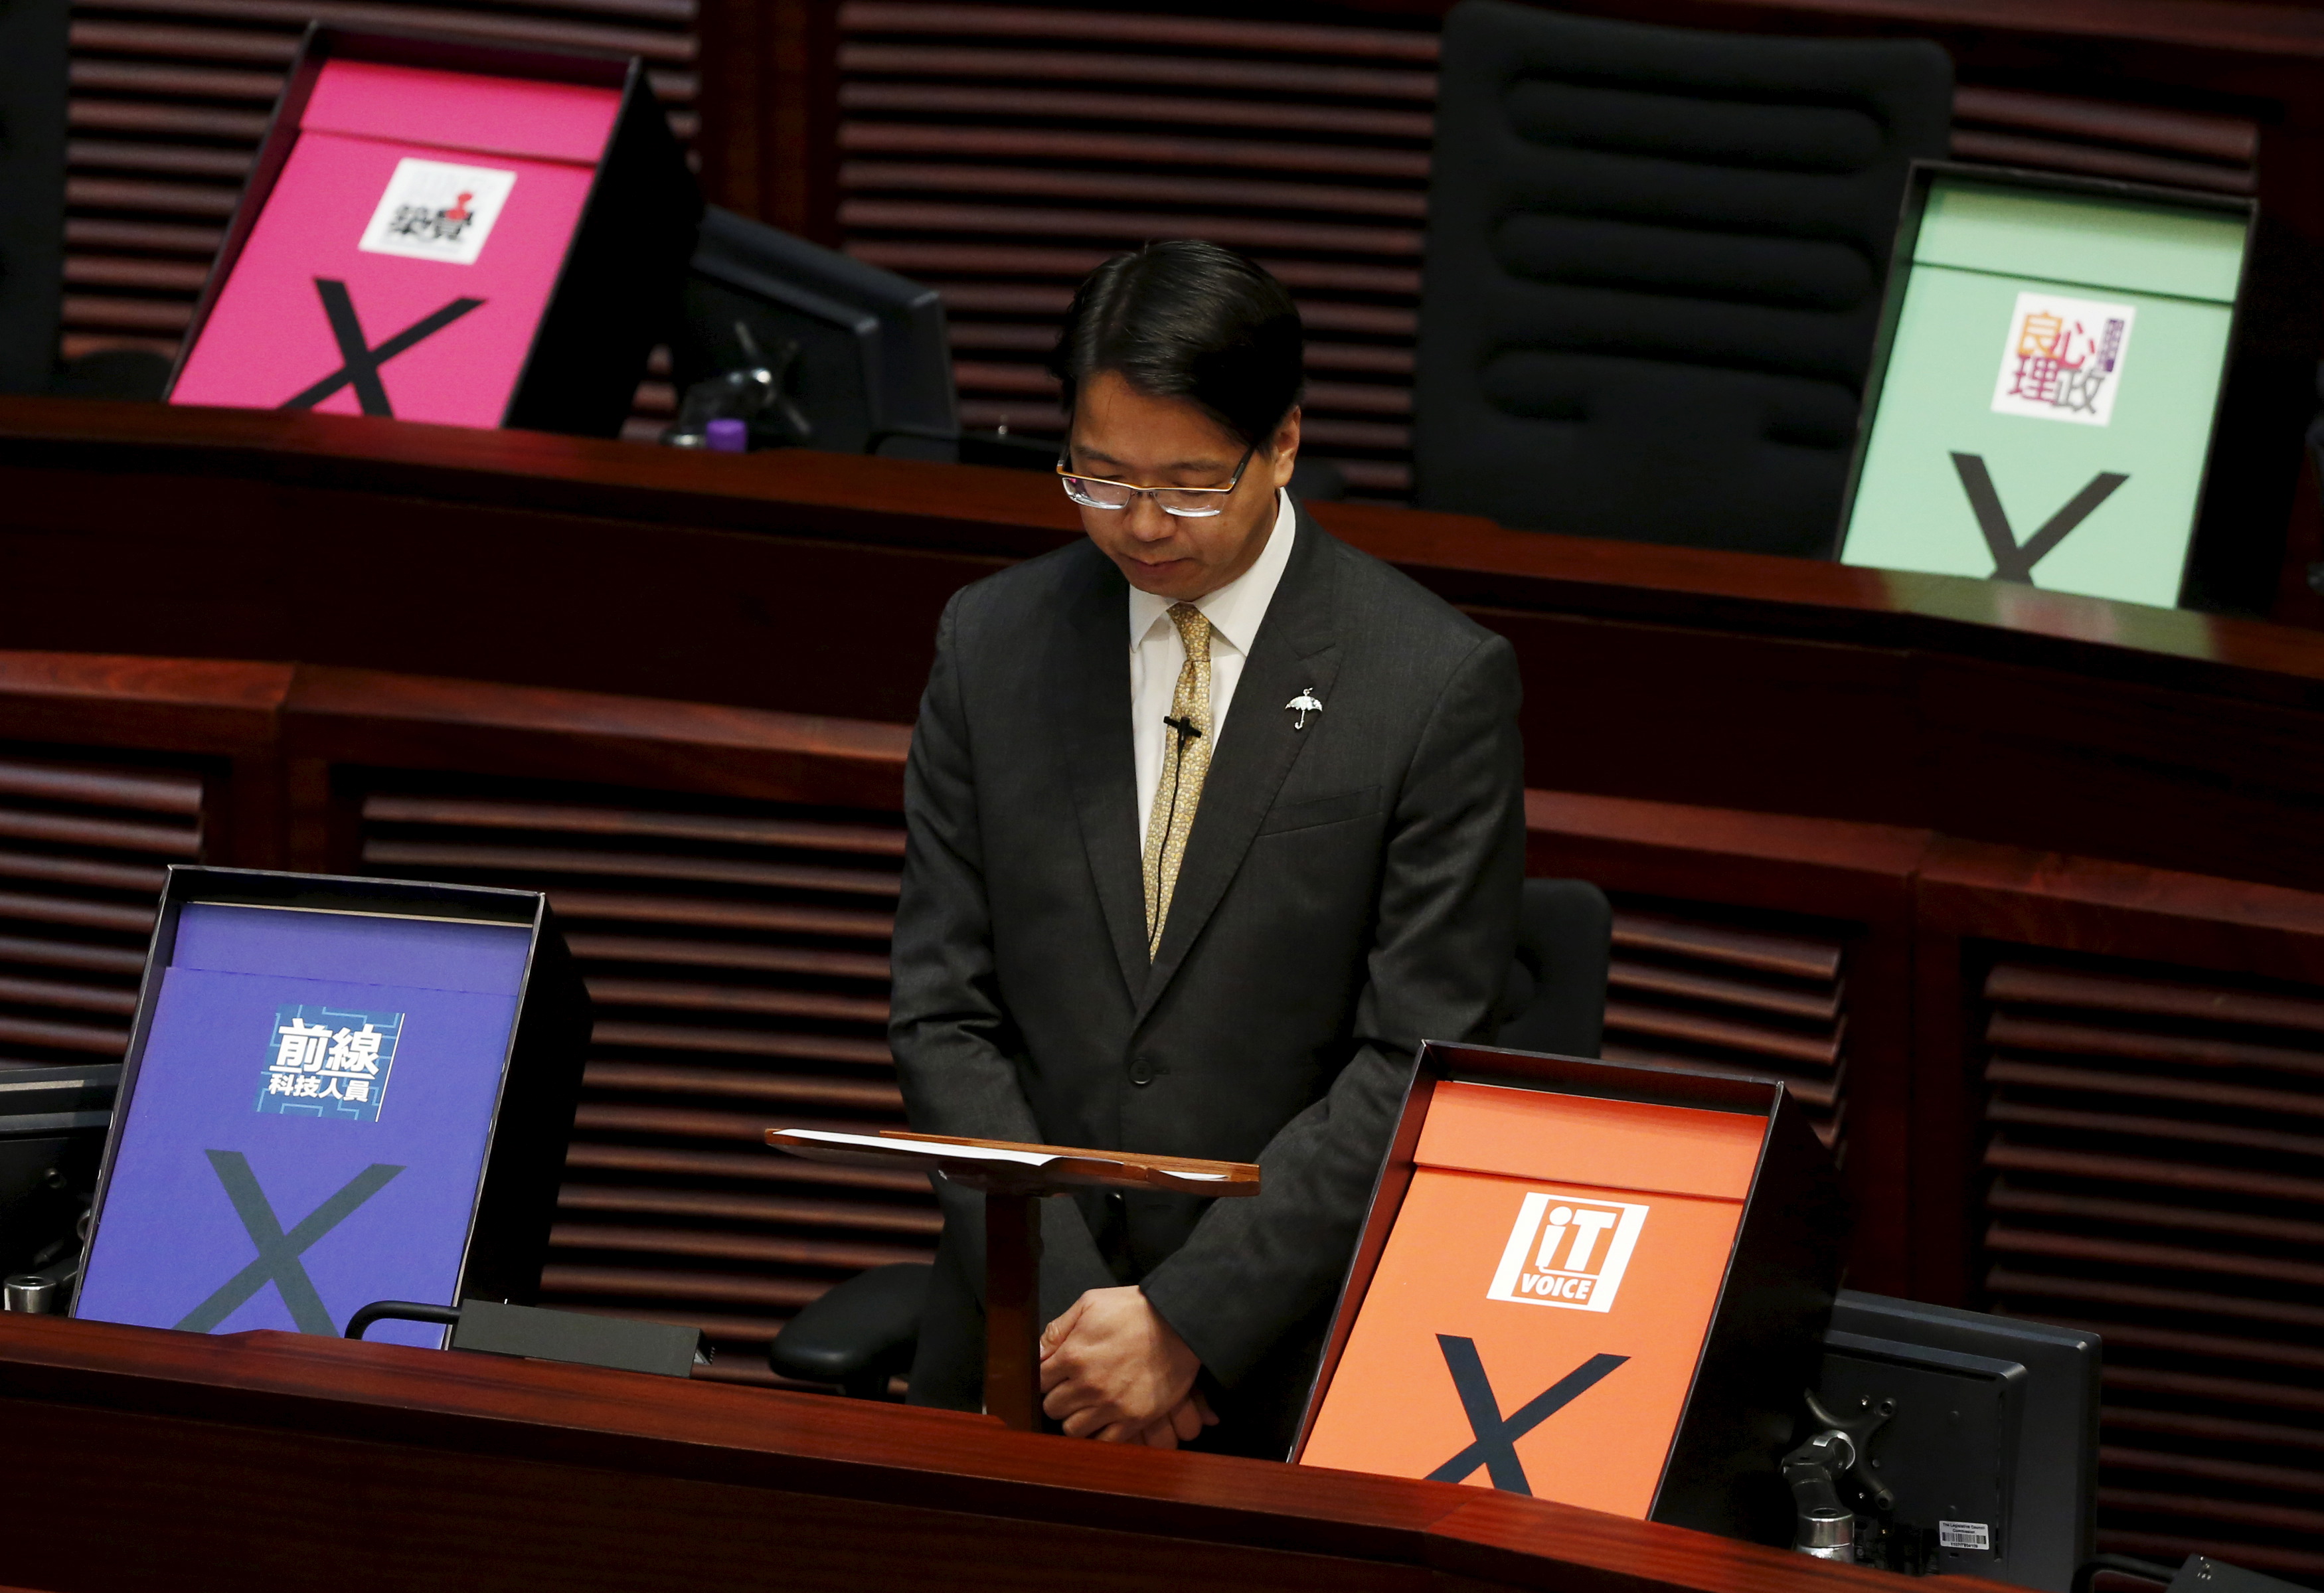 Pro-democracy lawmaker Charles Mok is surrounded by veto signs during his speech at the Legislative Council meeting in Hong Kong on June 18, 2015 (Bobby Yip—Reuters)